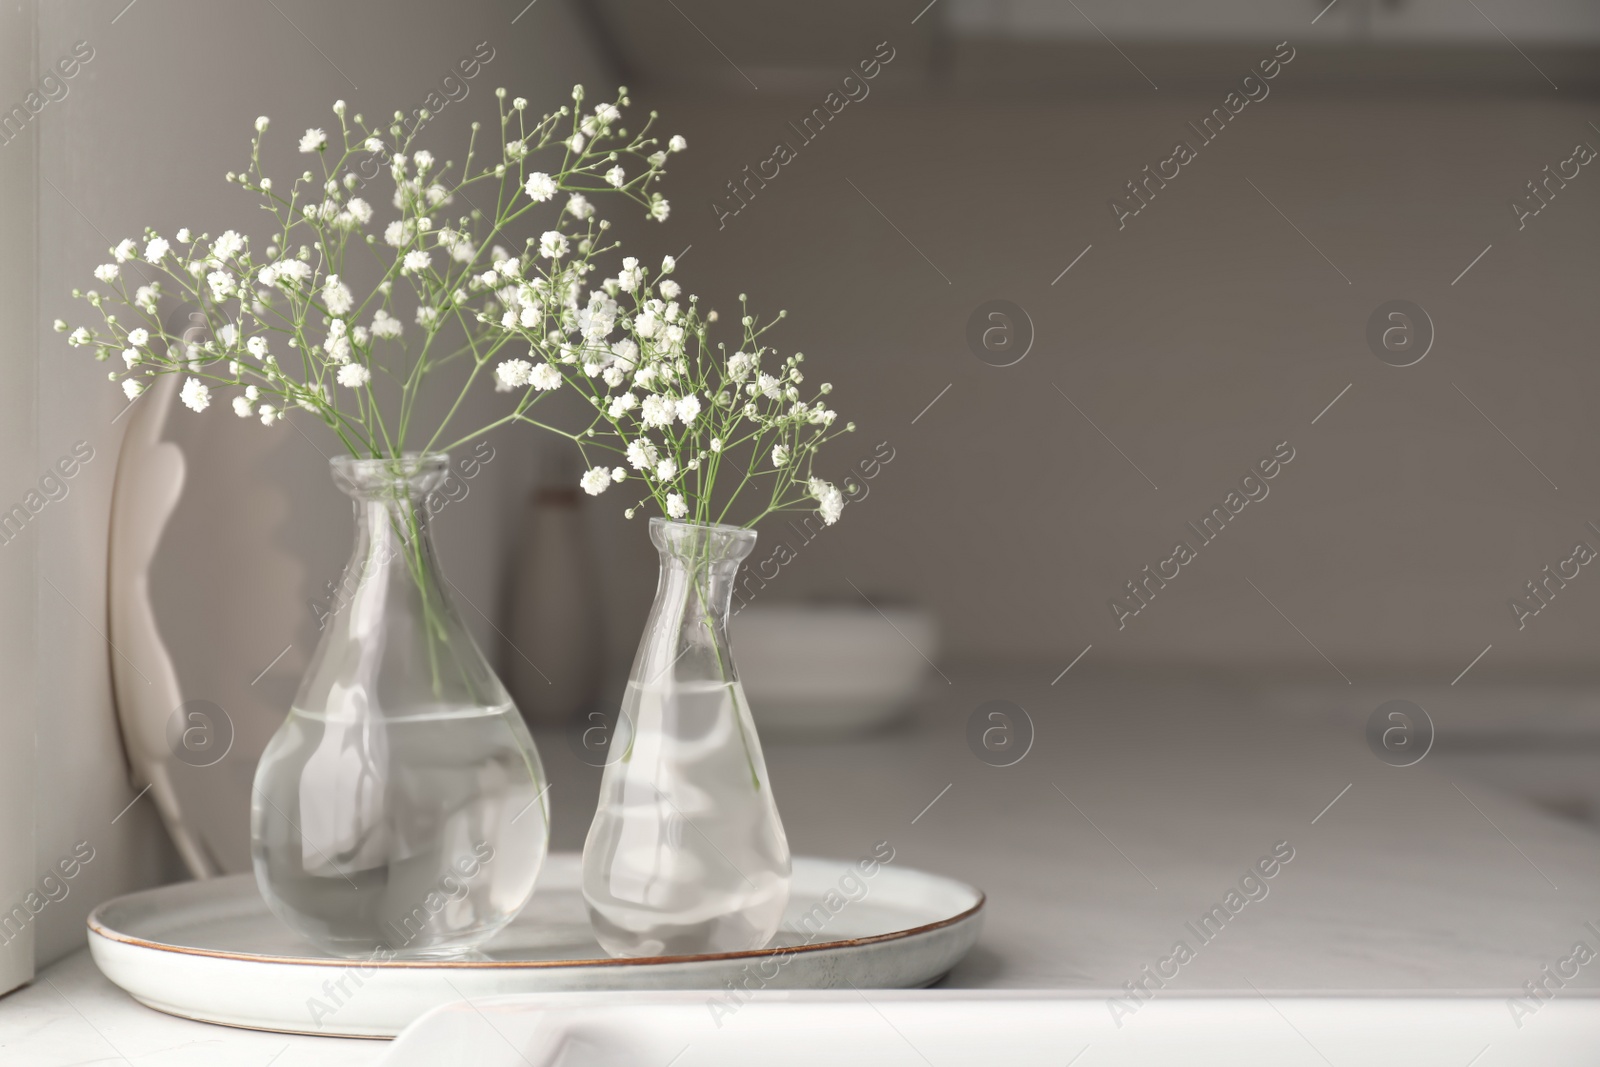 Photo of Vases with gypsophila flowers on countertop in kitchen, space for text. Interior design